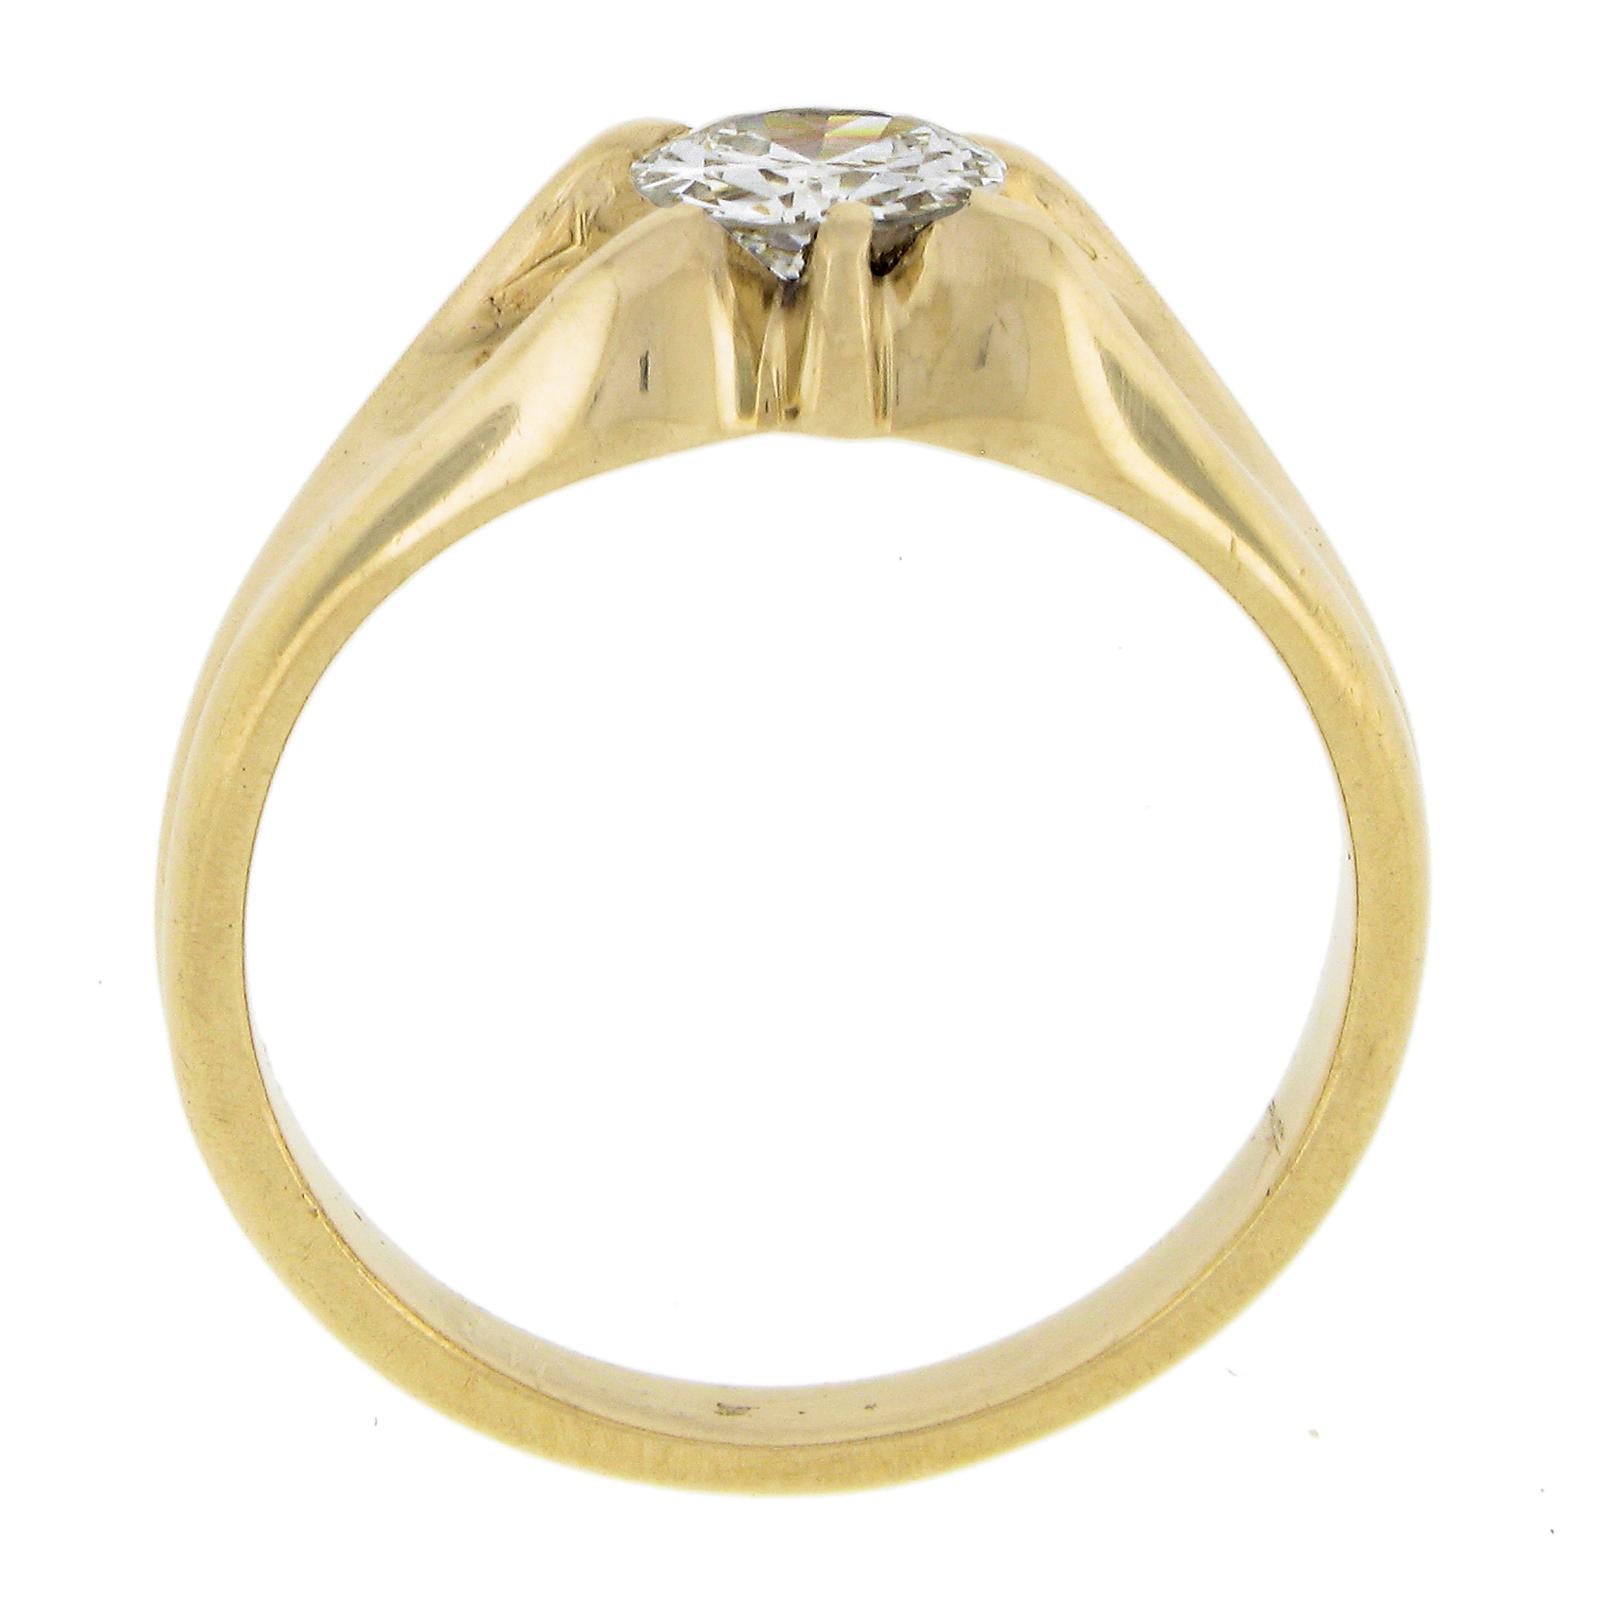 Antique 14k Gold 0.95ct GIA Certified Old Cut Belcher Diamond Engagement Ring For Sale 3